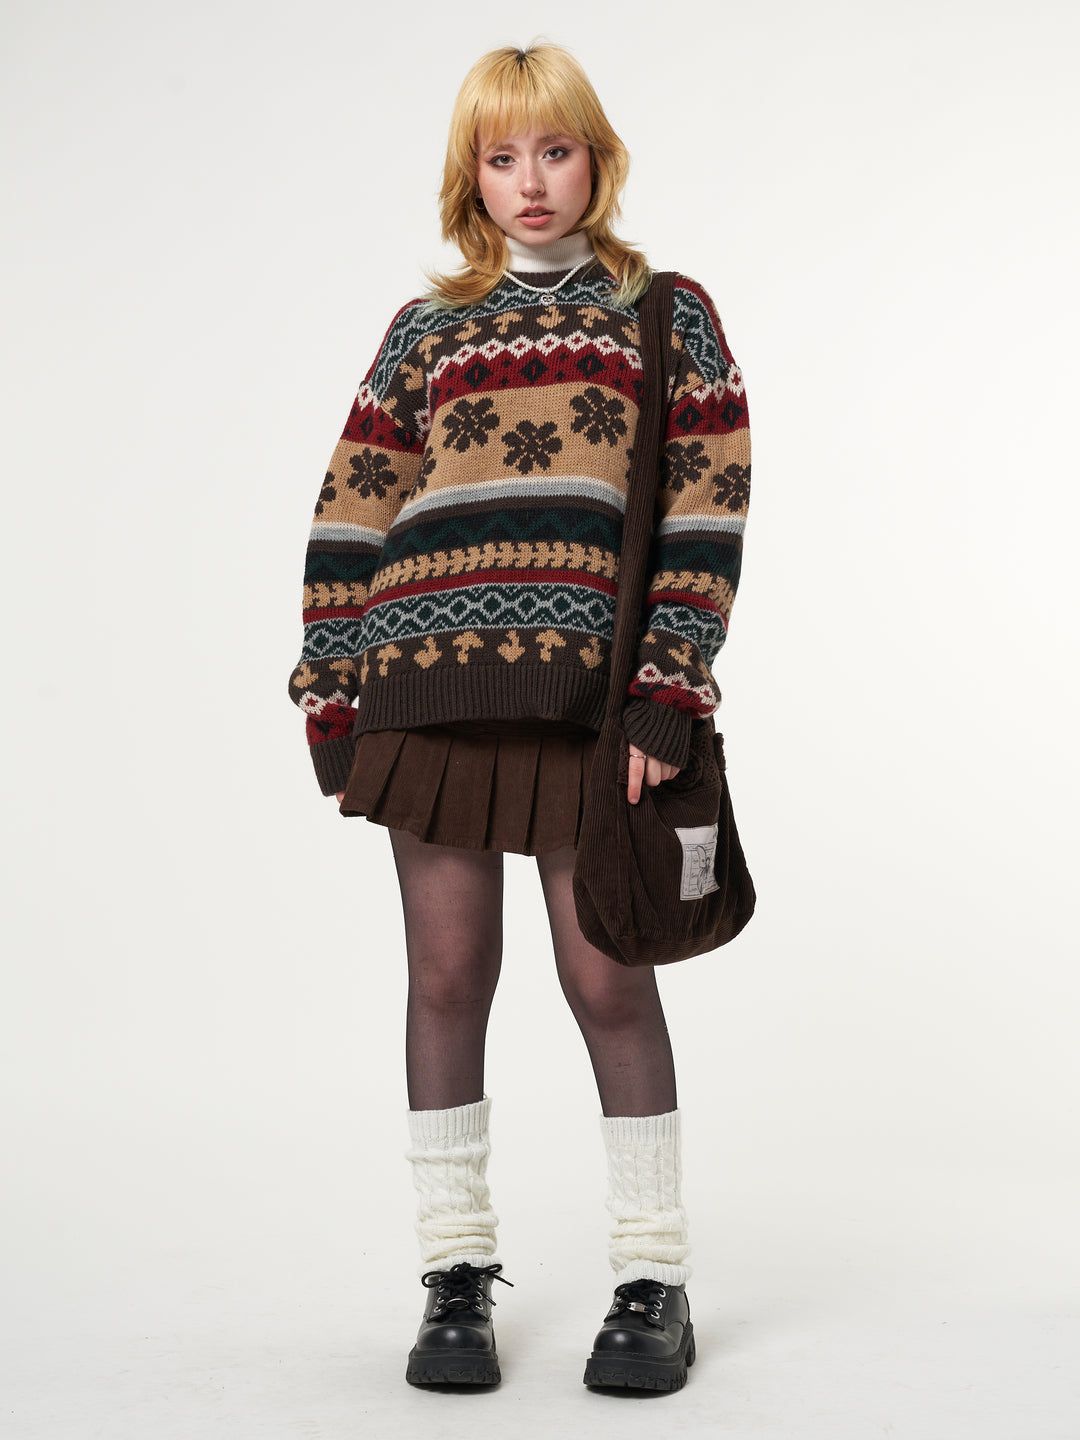 Knitted Jumpers For You